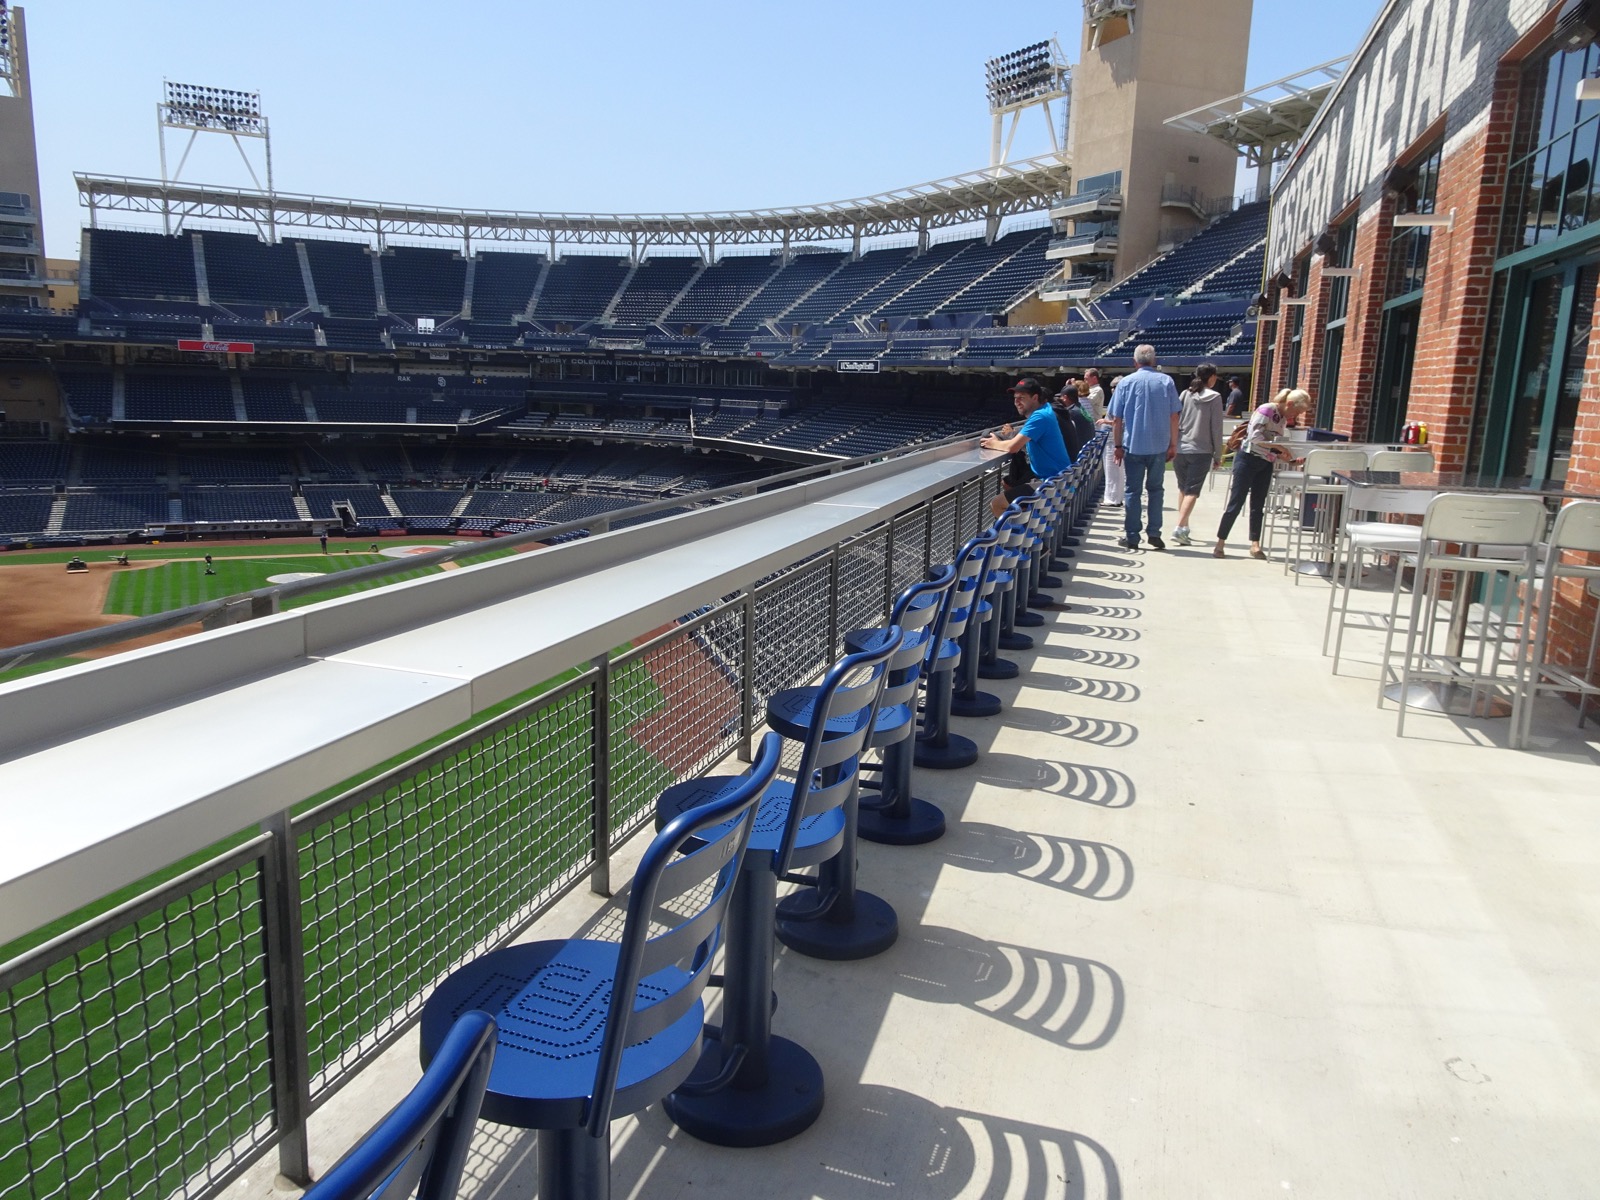 The team store at Petco Park is now open! Come down and pick up